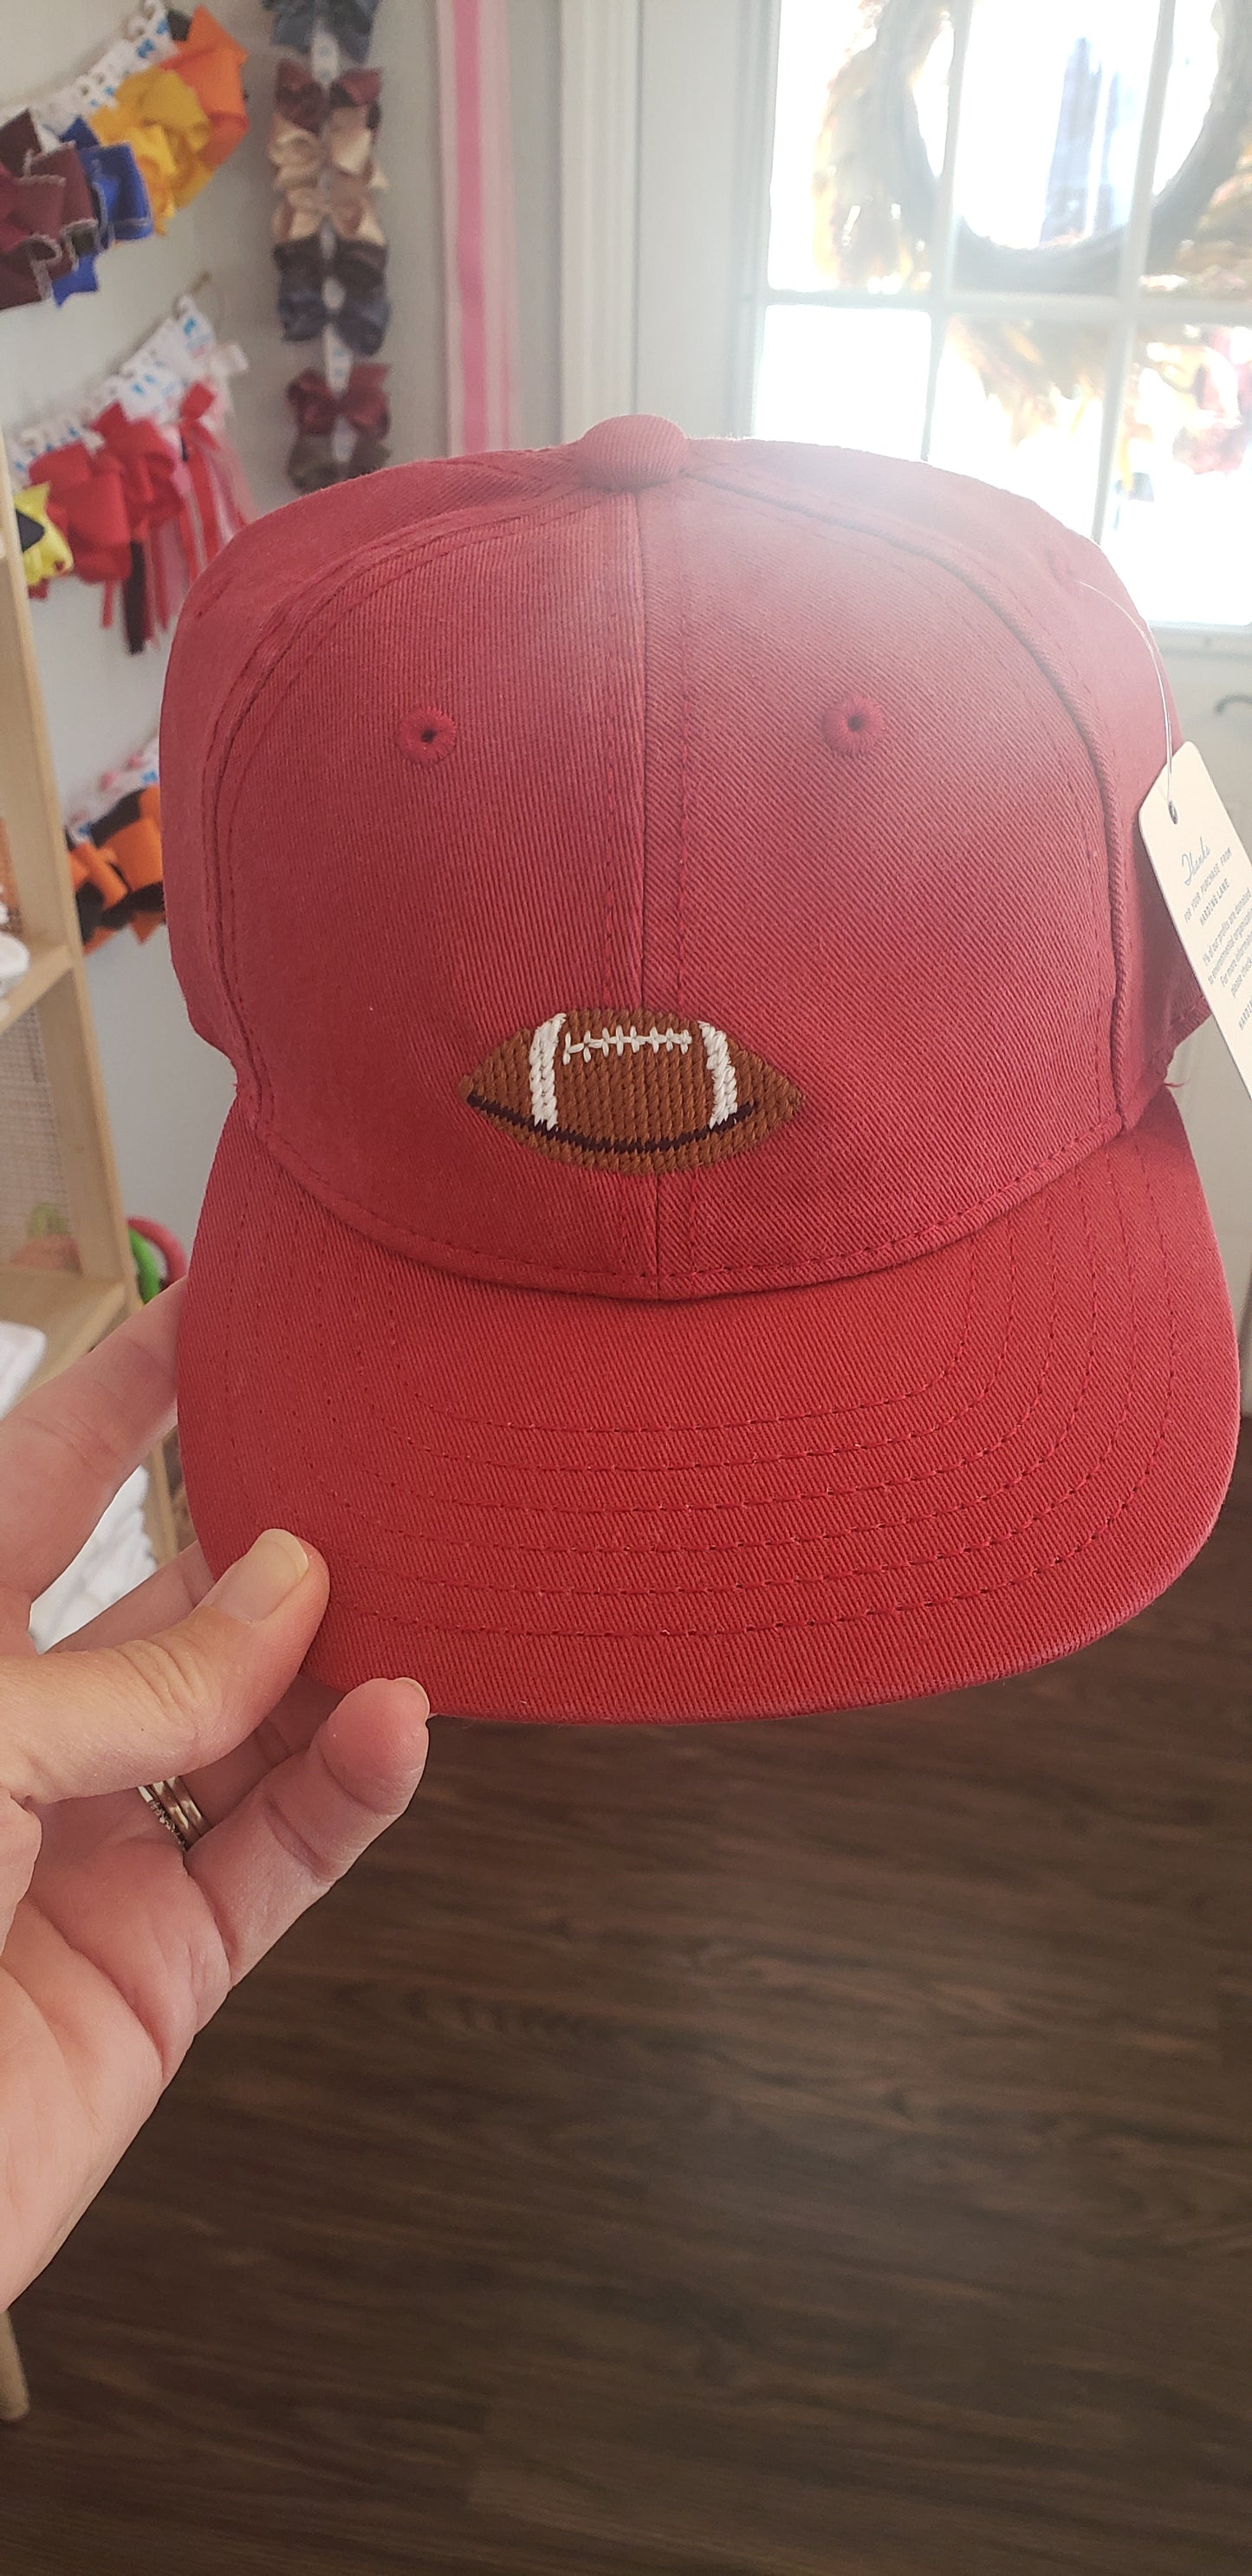 Weathered red football hat